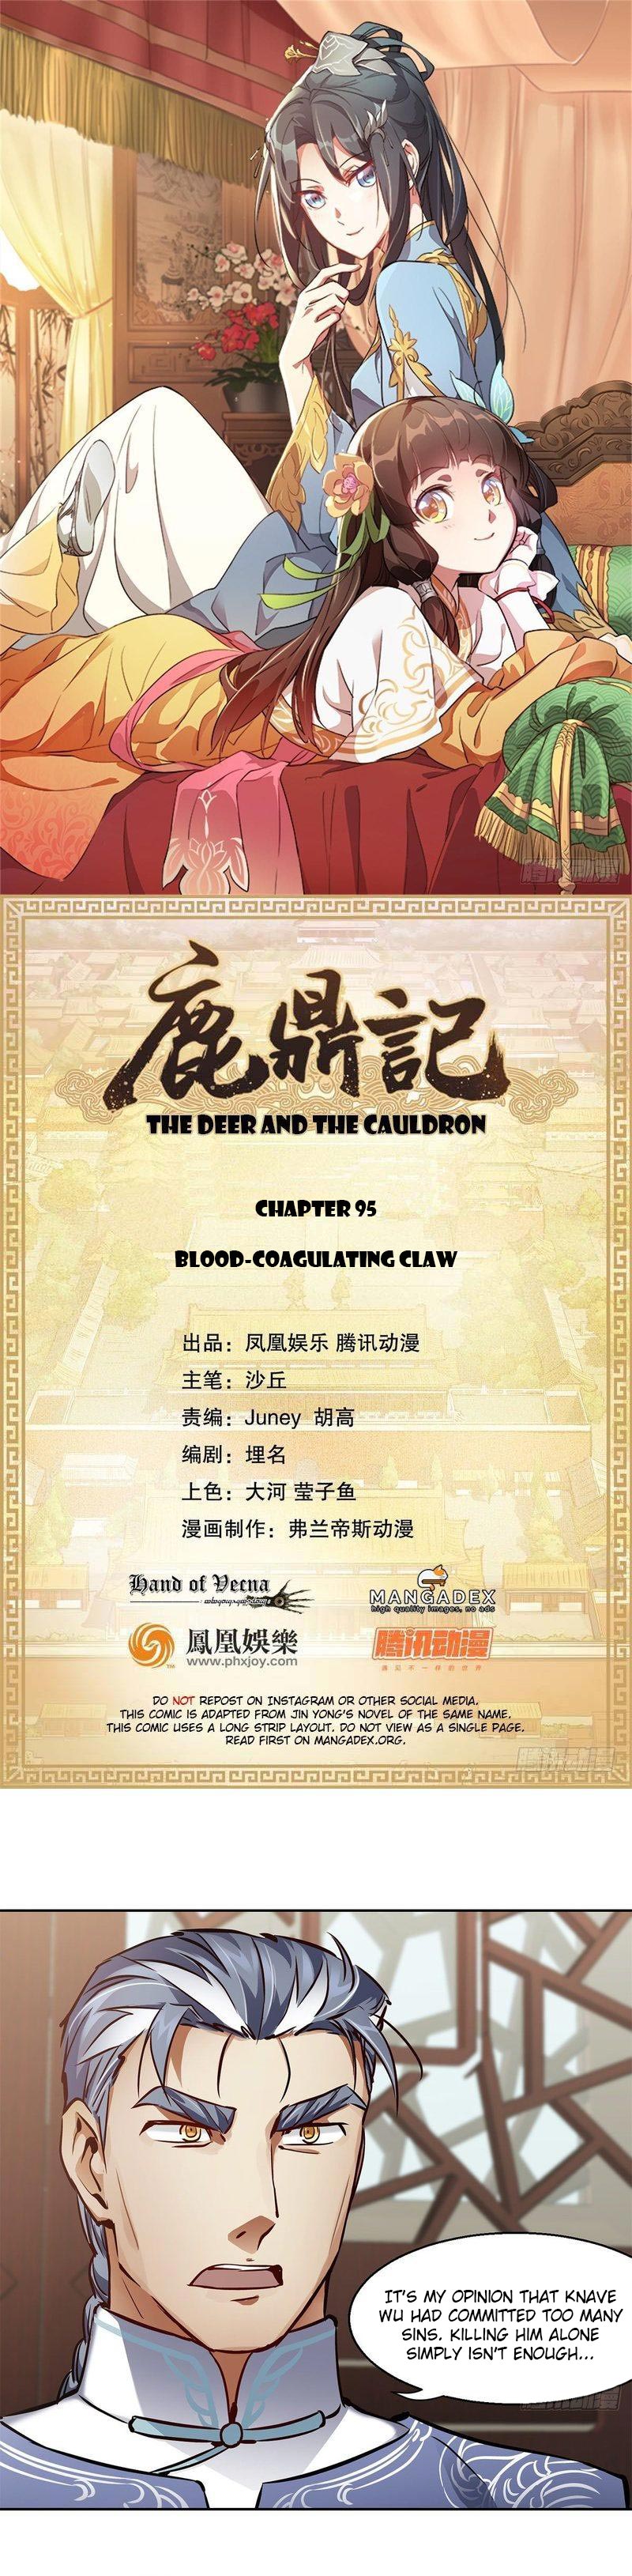 The Deer and the Cauldron Ch. 95 Blood Coagulating Claw